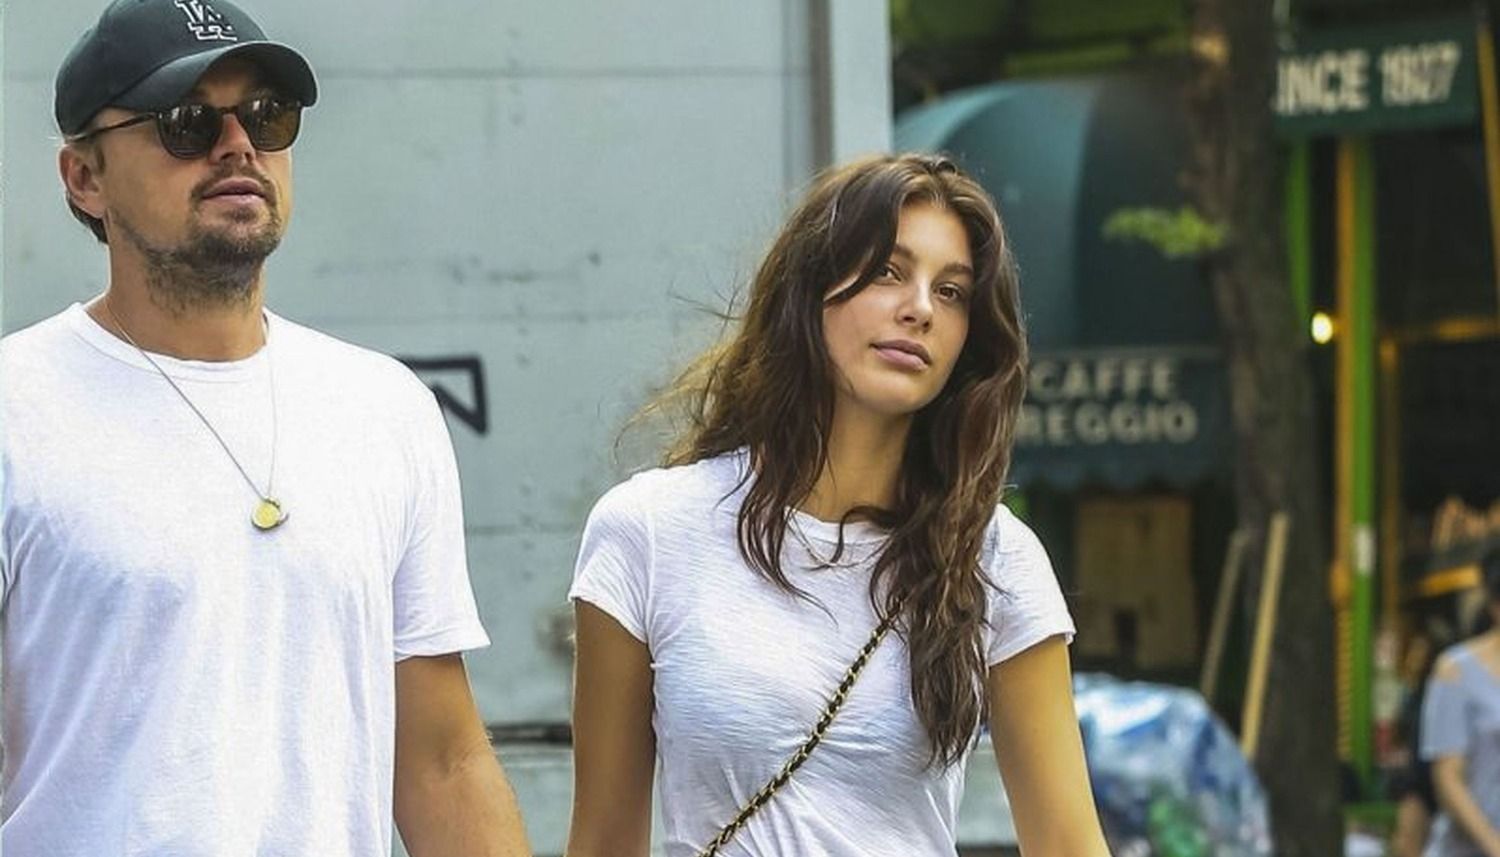 The actor, who is in a relationship with the Argentine model Camila Morrone, is in charge of a foundation dedicated to the defense of the environment.